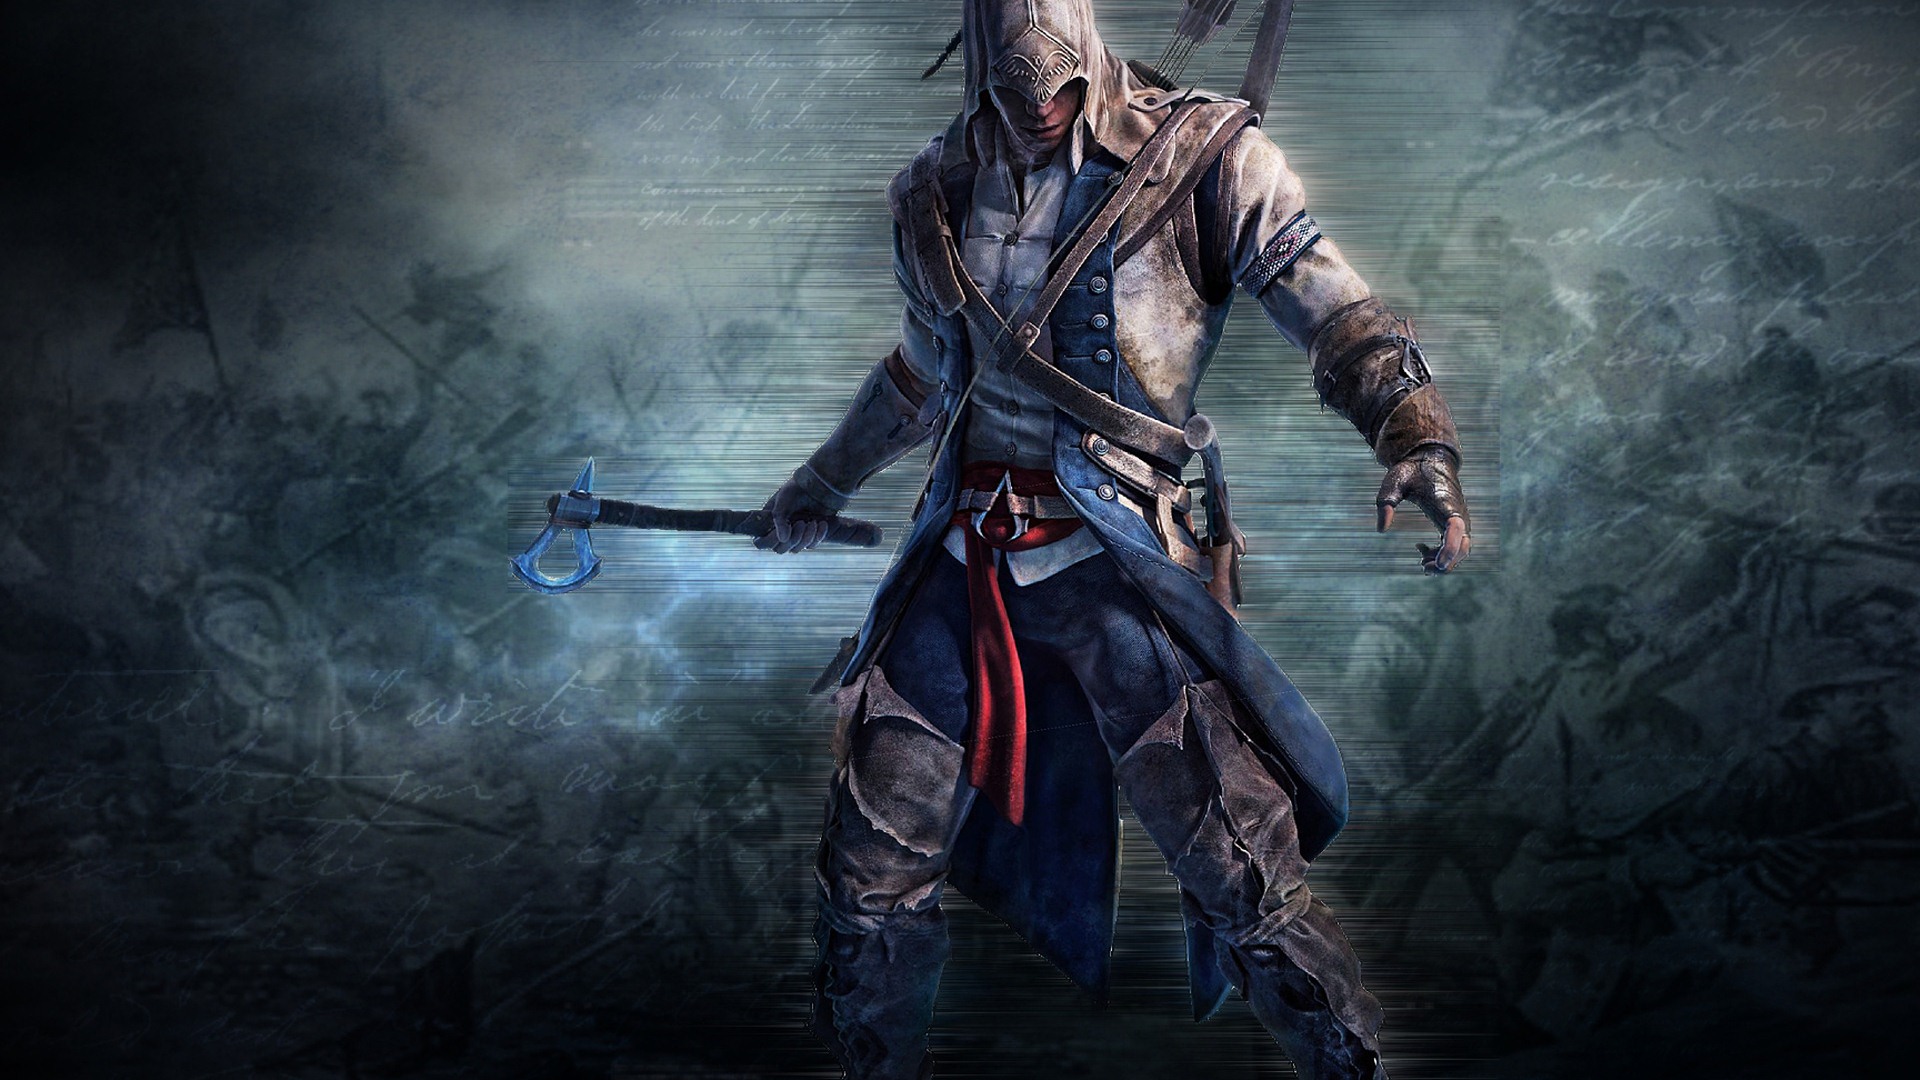 Assassin's Creed 3 HD wallpapers #19 - 1920x1080